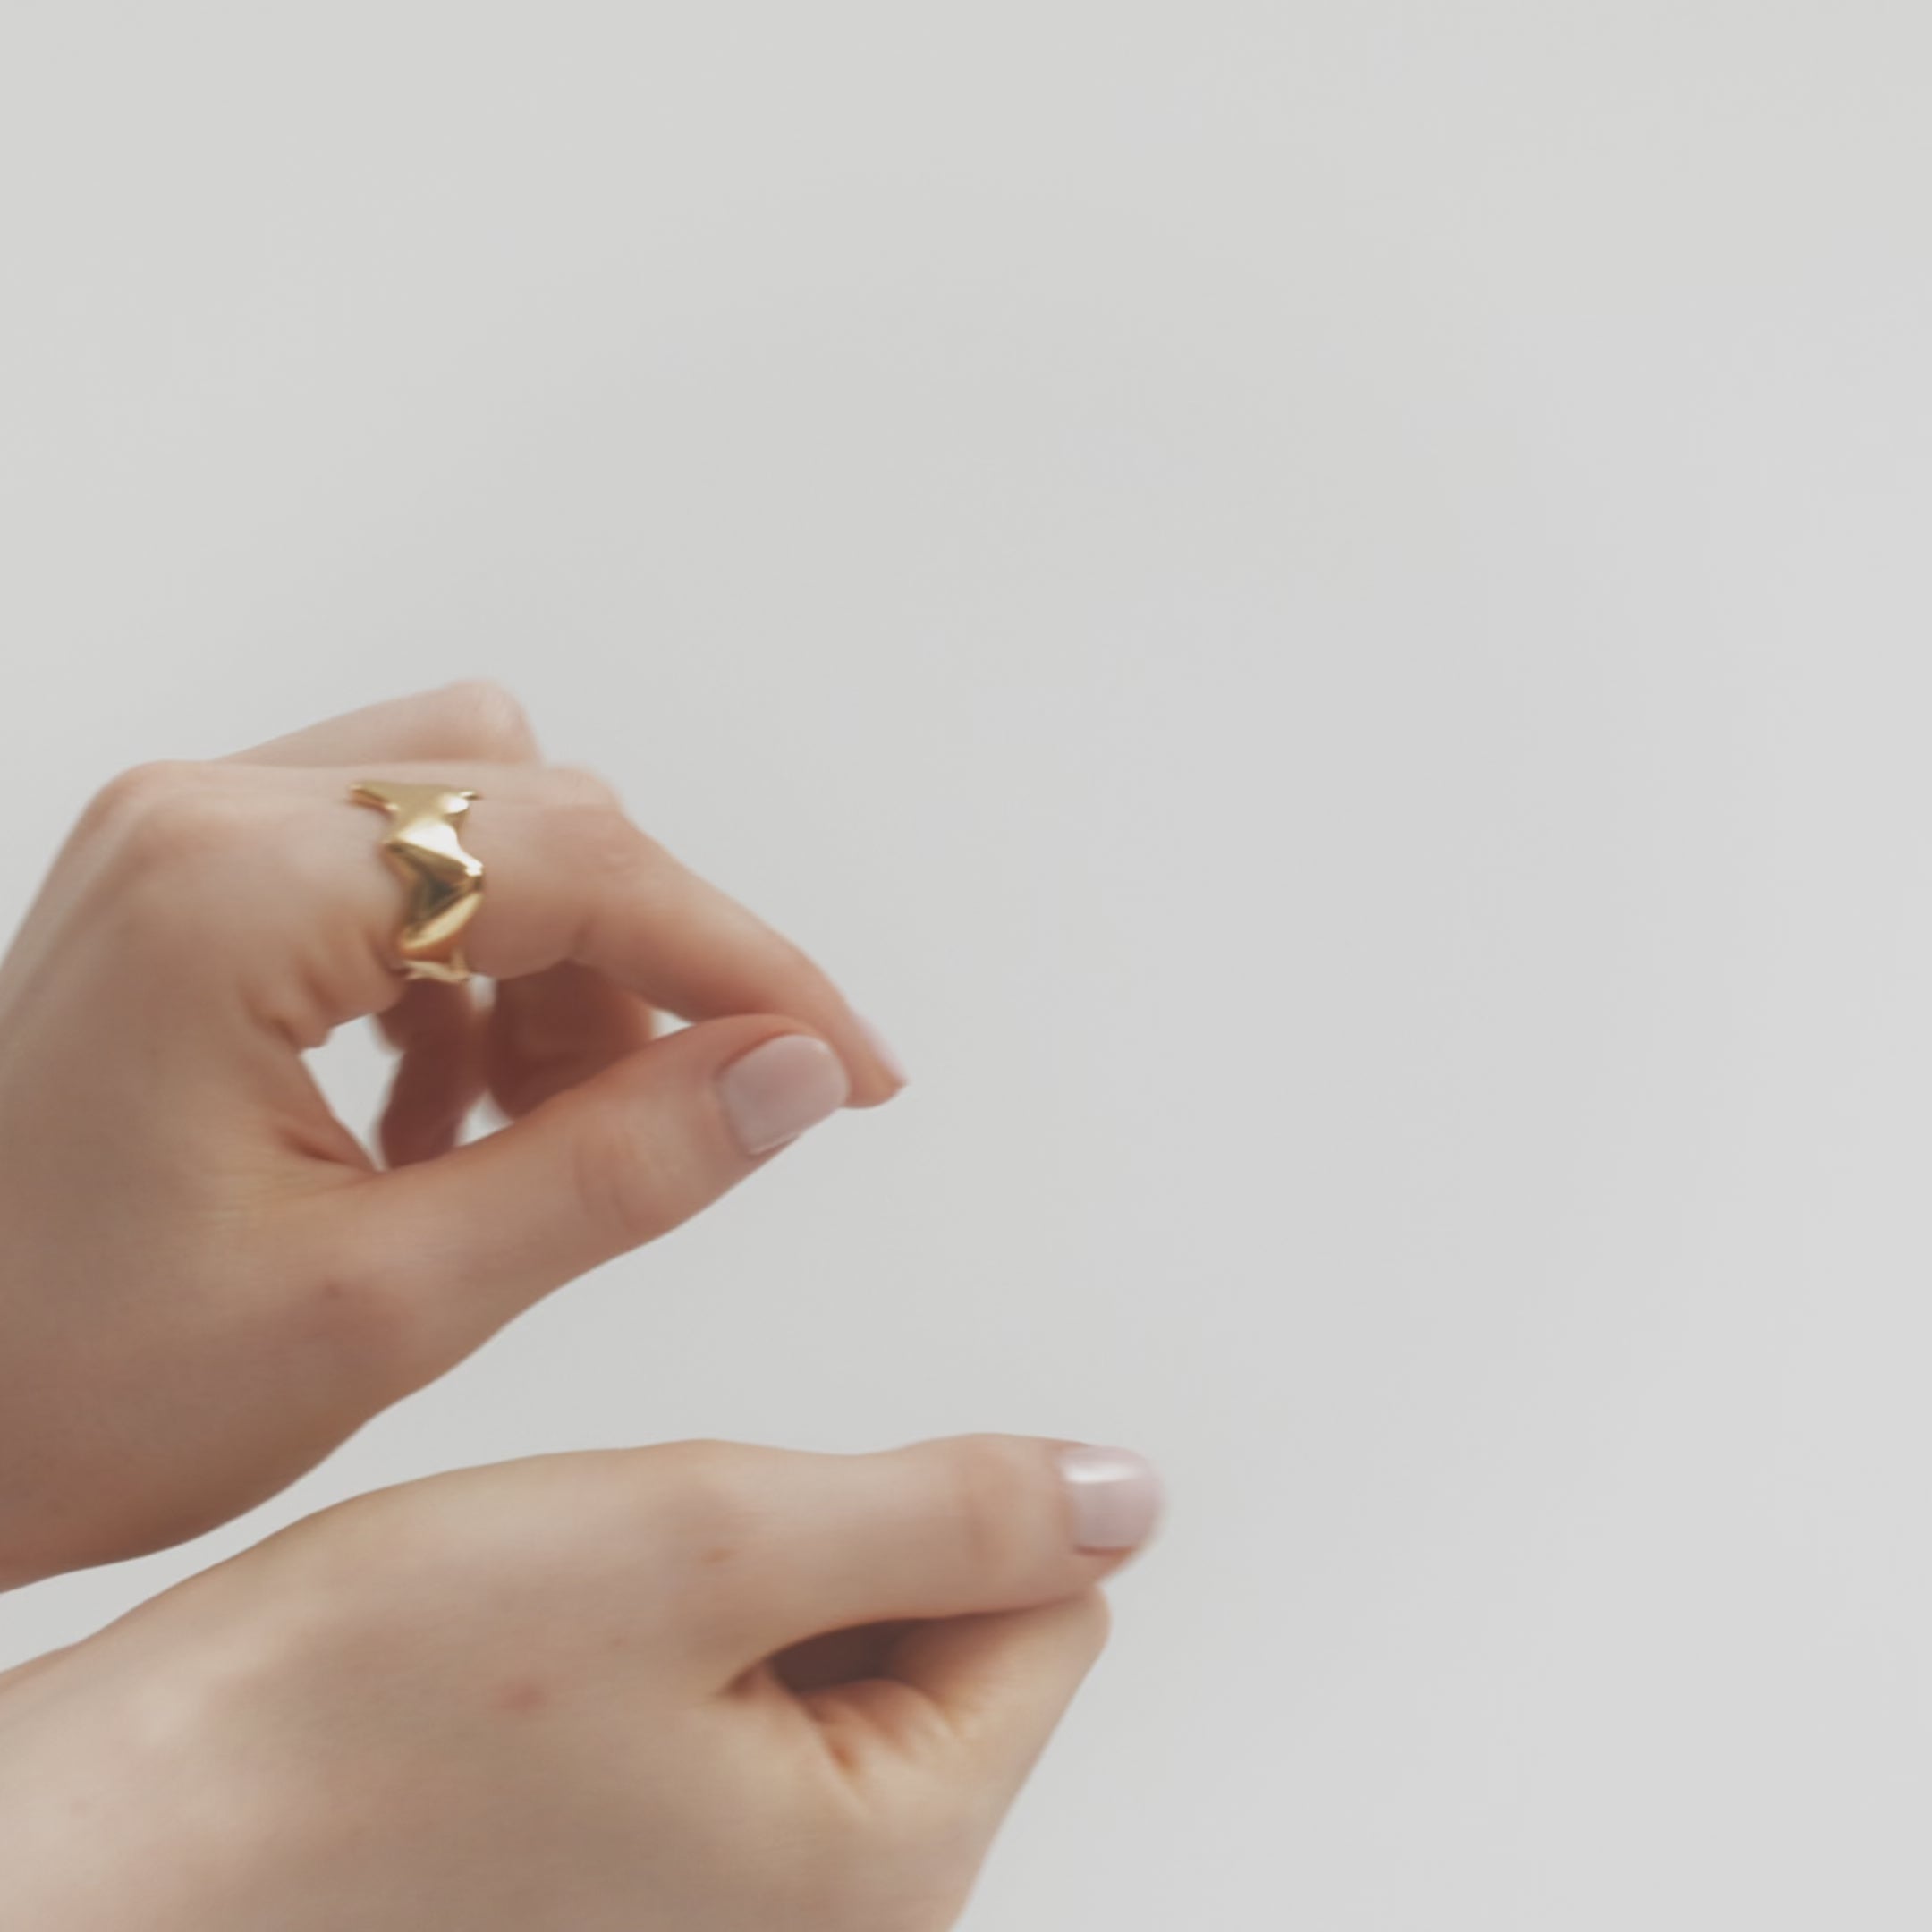 Poise Bold Wide Ring in 18k Gold Vermeil shown on a hand.